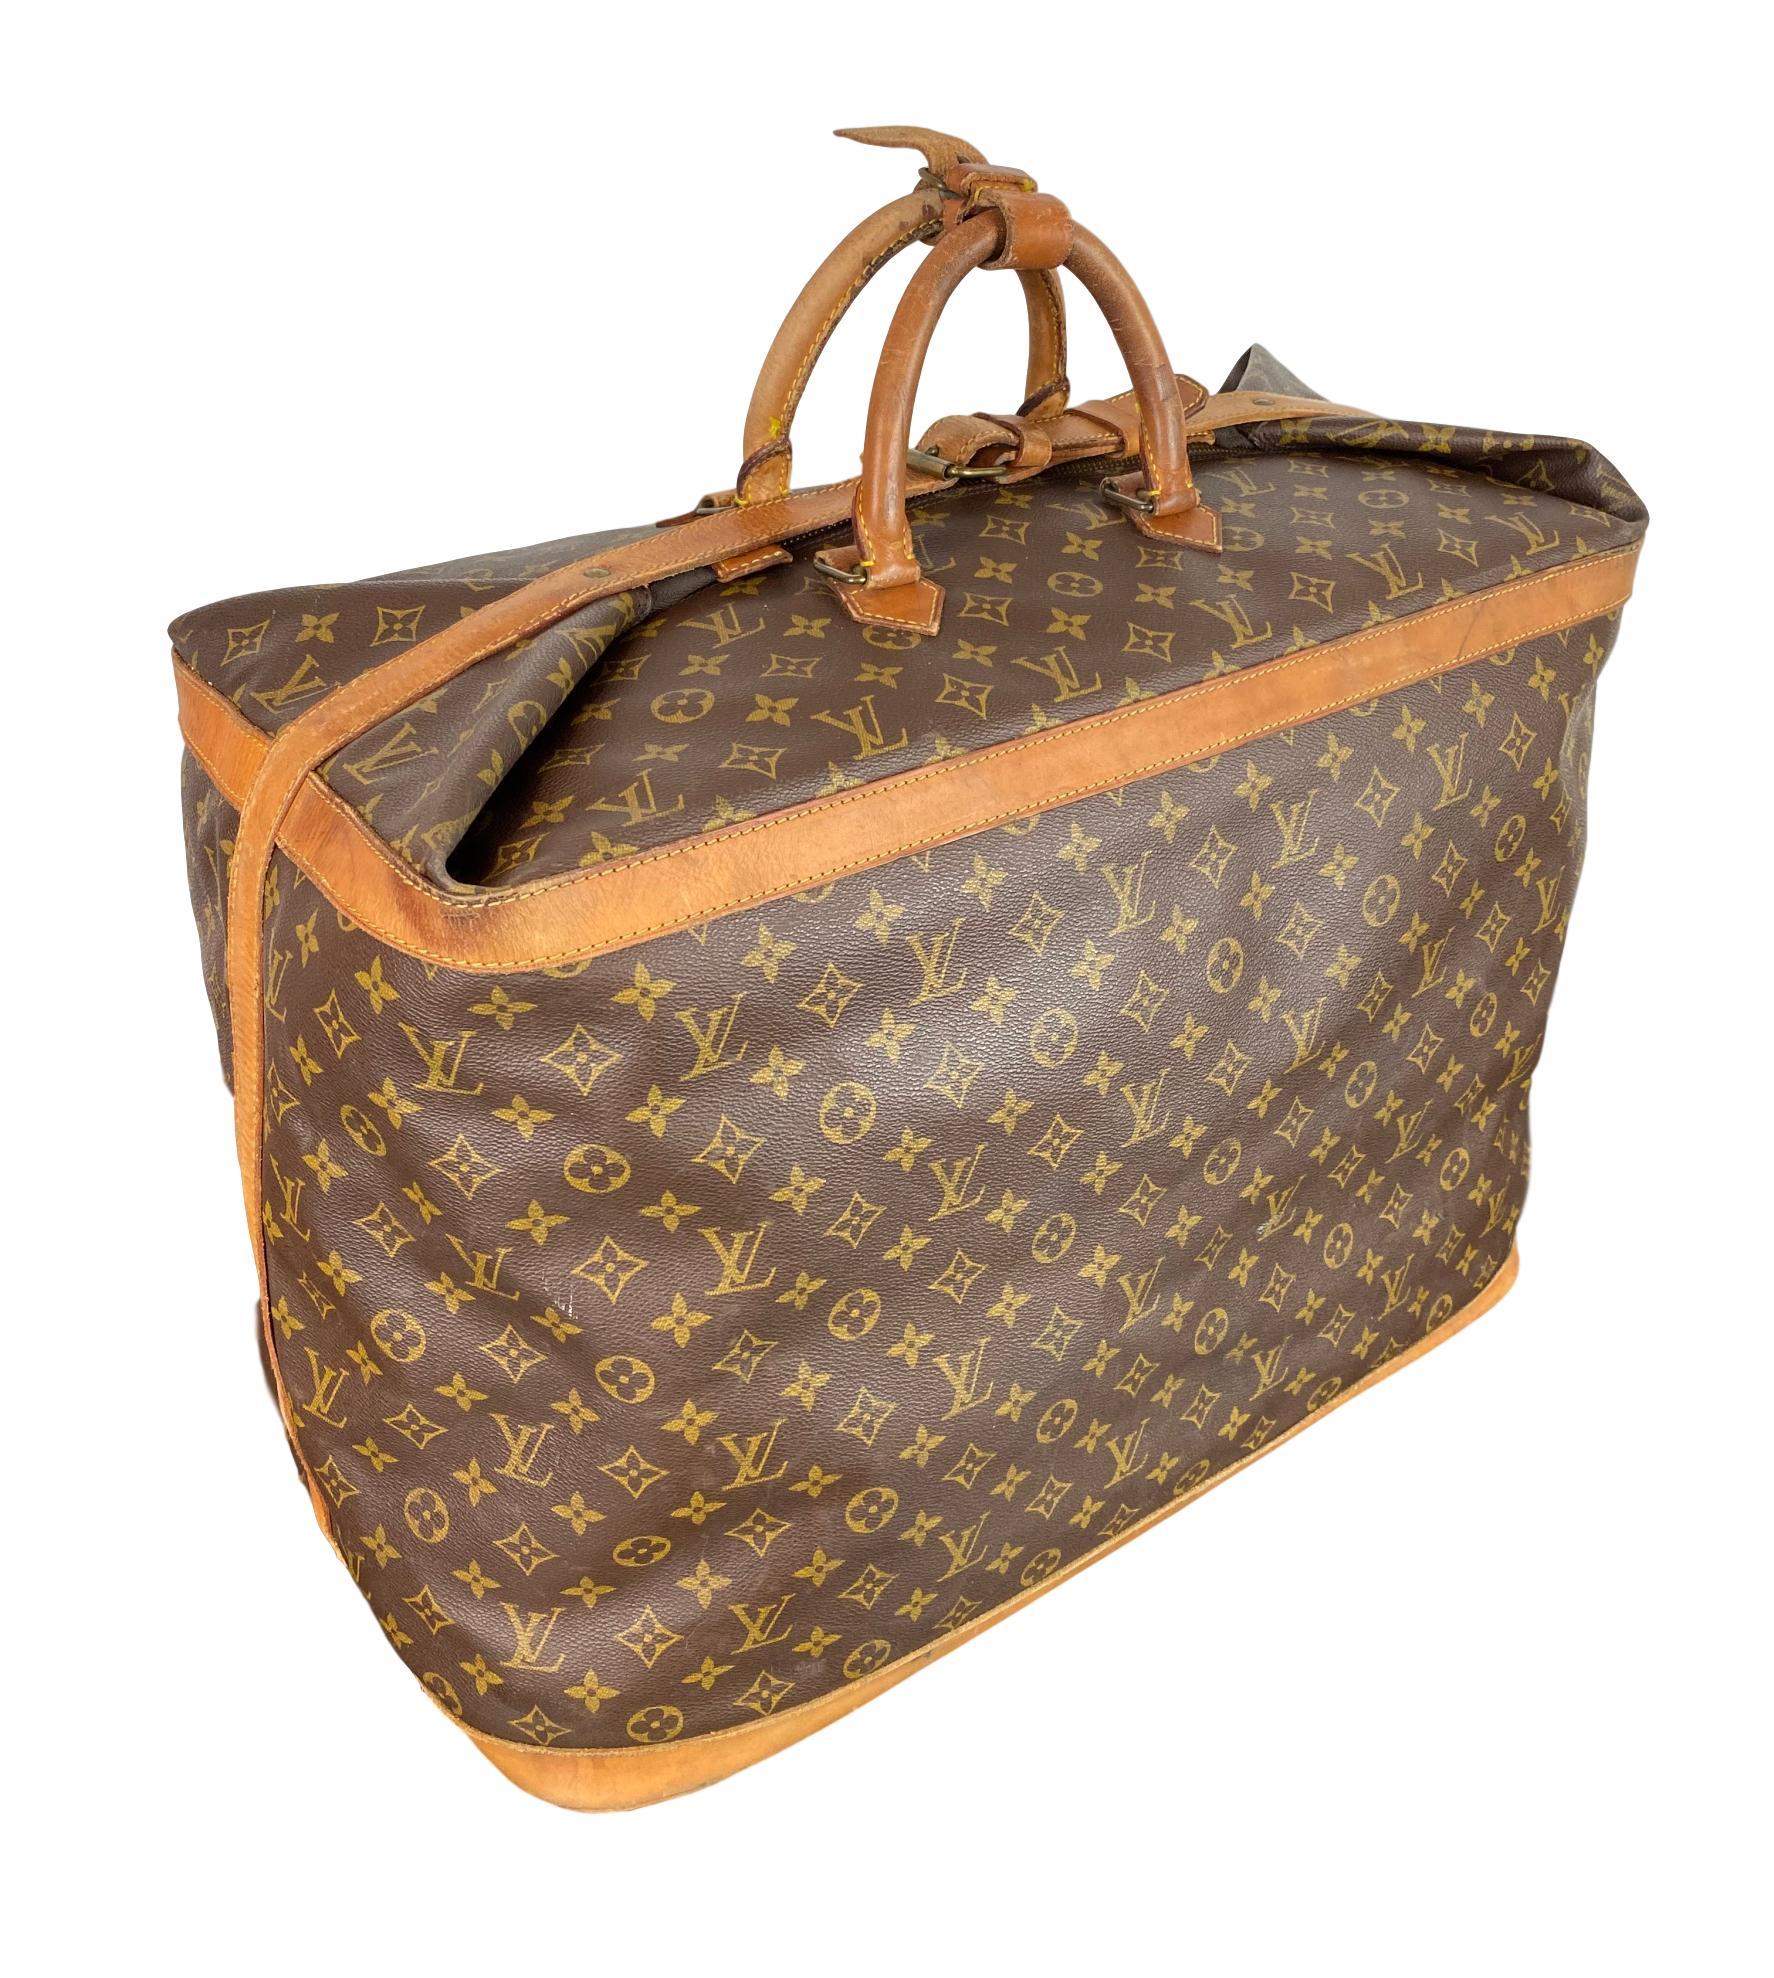 Vintage Louis Vuitton Large 55 Cruiser Travel Bag, France September 1990. This vintage bag comes in the classic Louis Vuitton Monogram canvas with rolled top vachetta handles with a strap closure as well as folded flap that buckles the entirety of